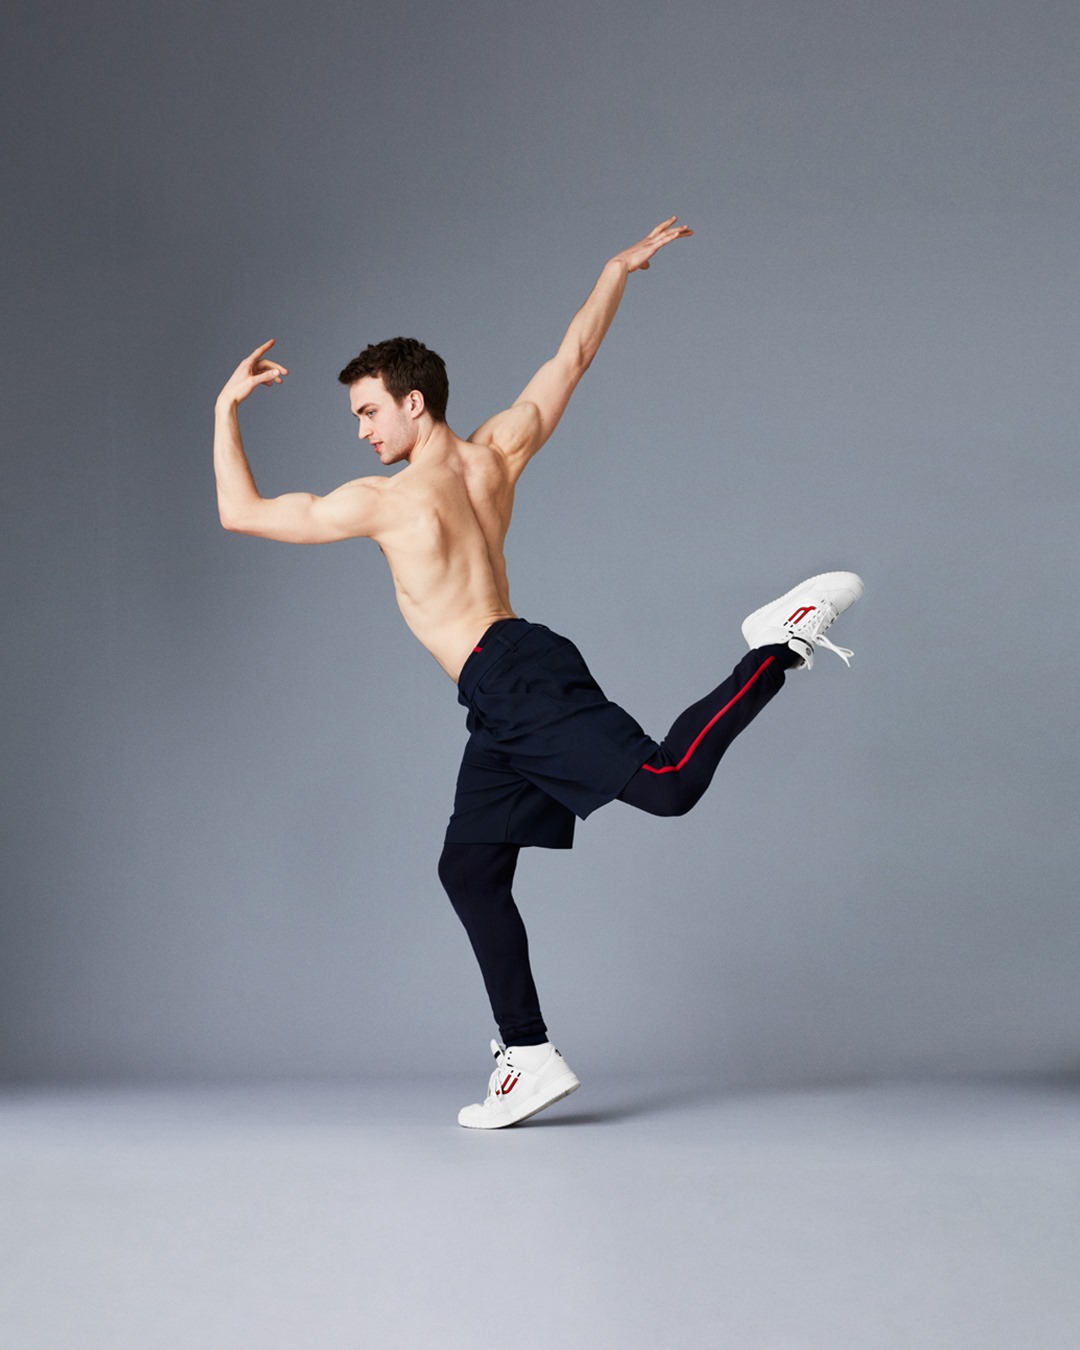 Made by movement. Dancer Matthew Ball defied the norm to pursue his dreams with passion and dedication. This is how #ChampionsAreMade. 